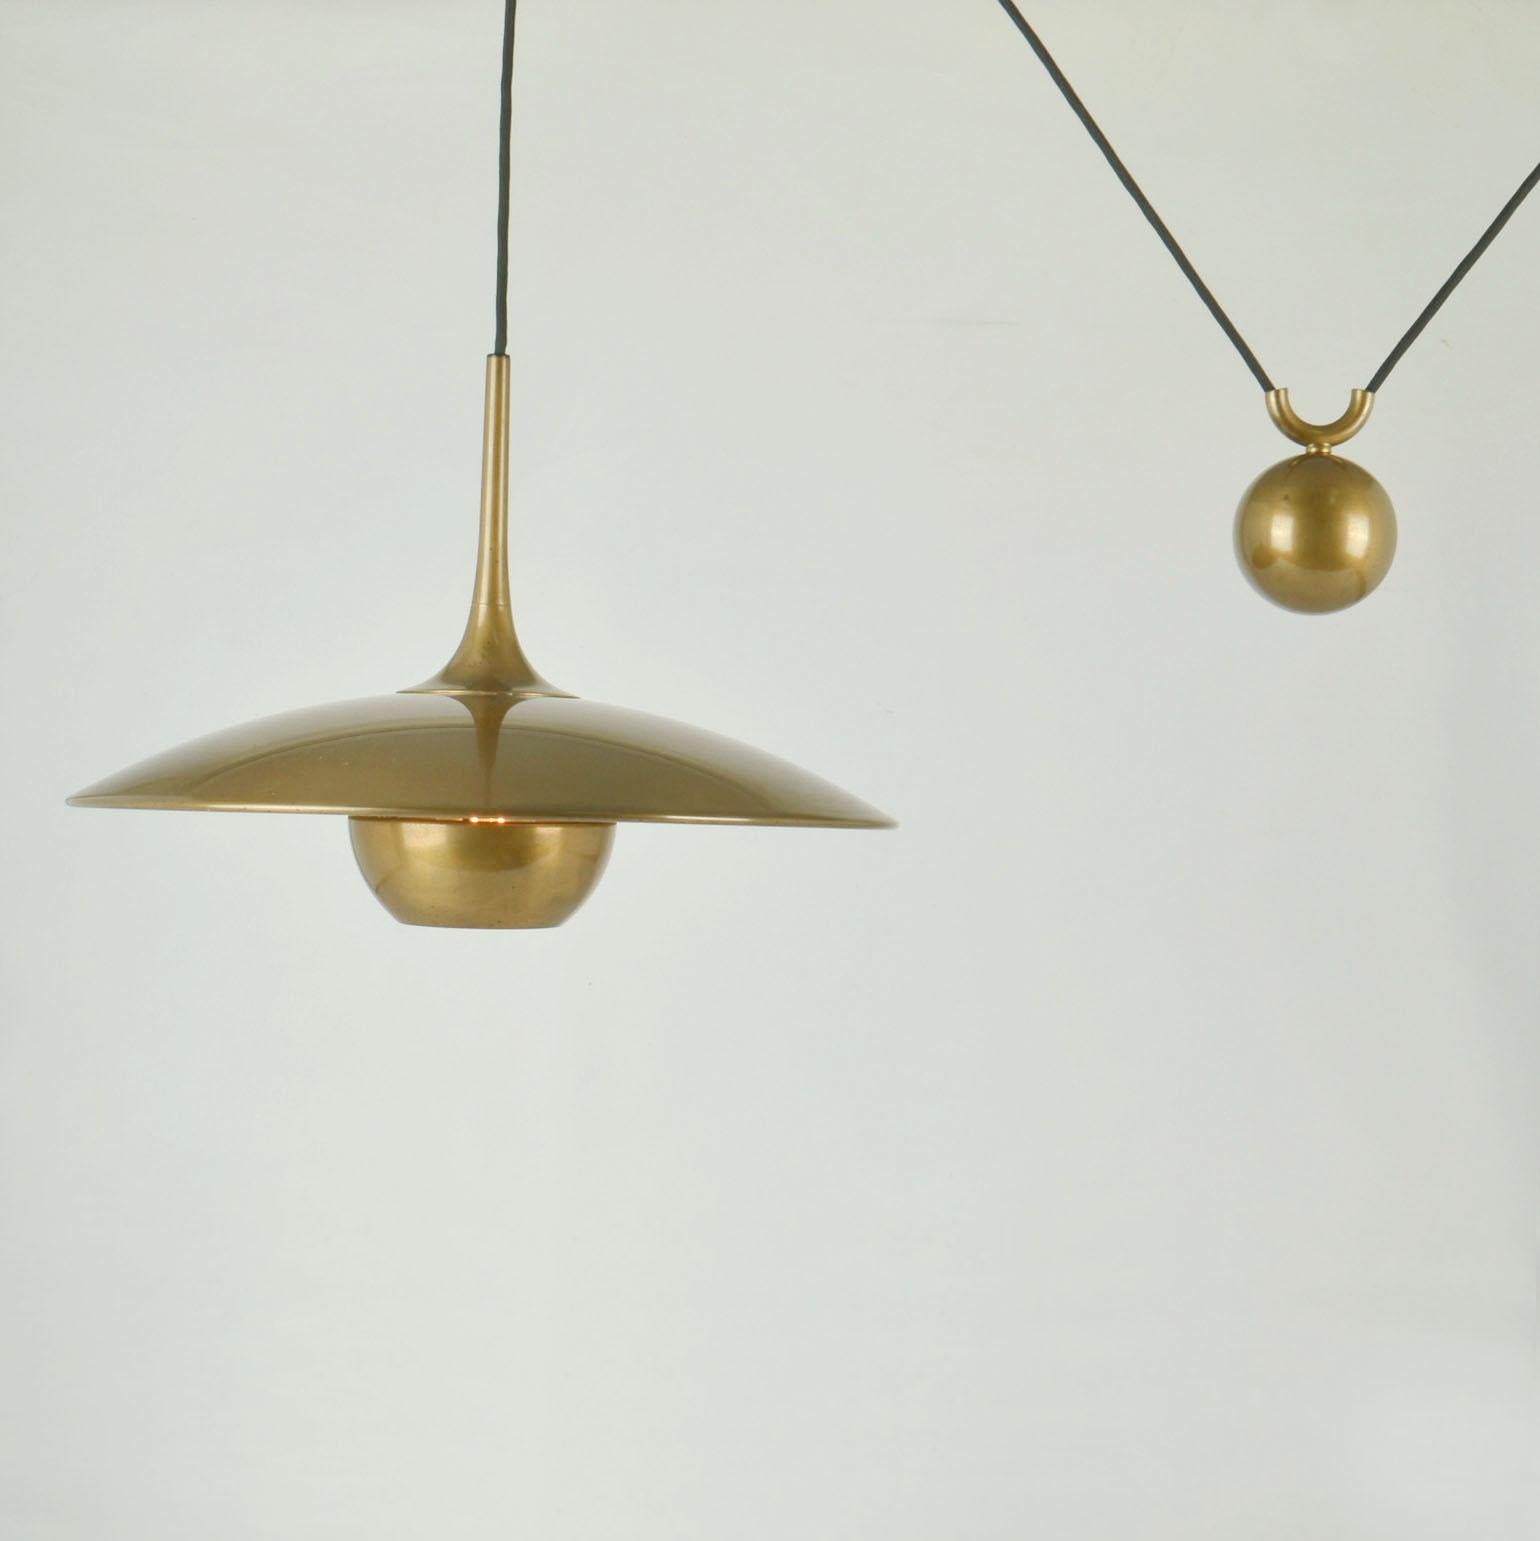 Mid-20th Century Pendant Lamp Onos 40 in Brass by Florian Schulz 1960's, Counterbalance